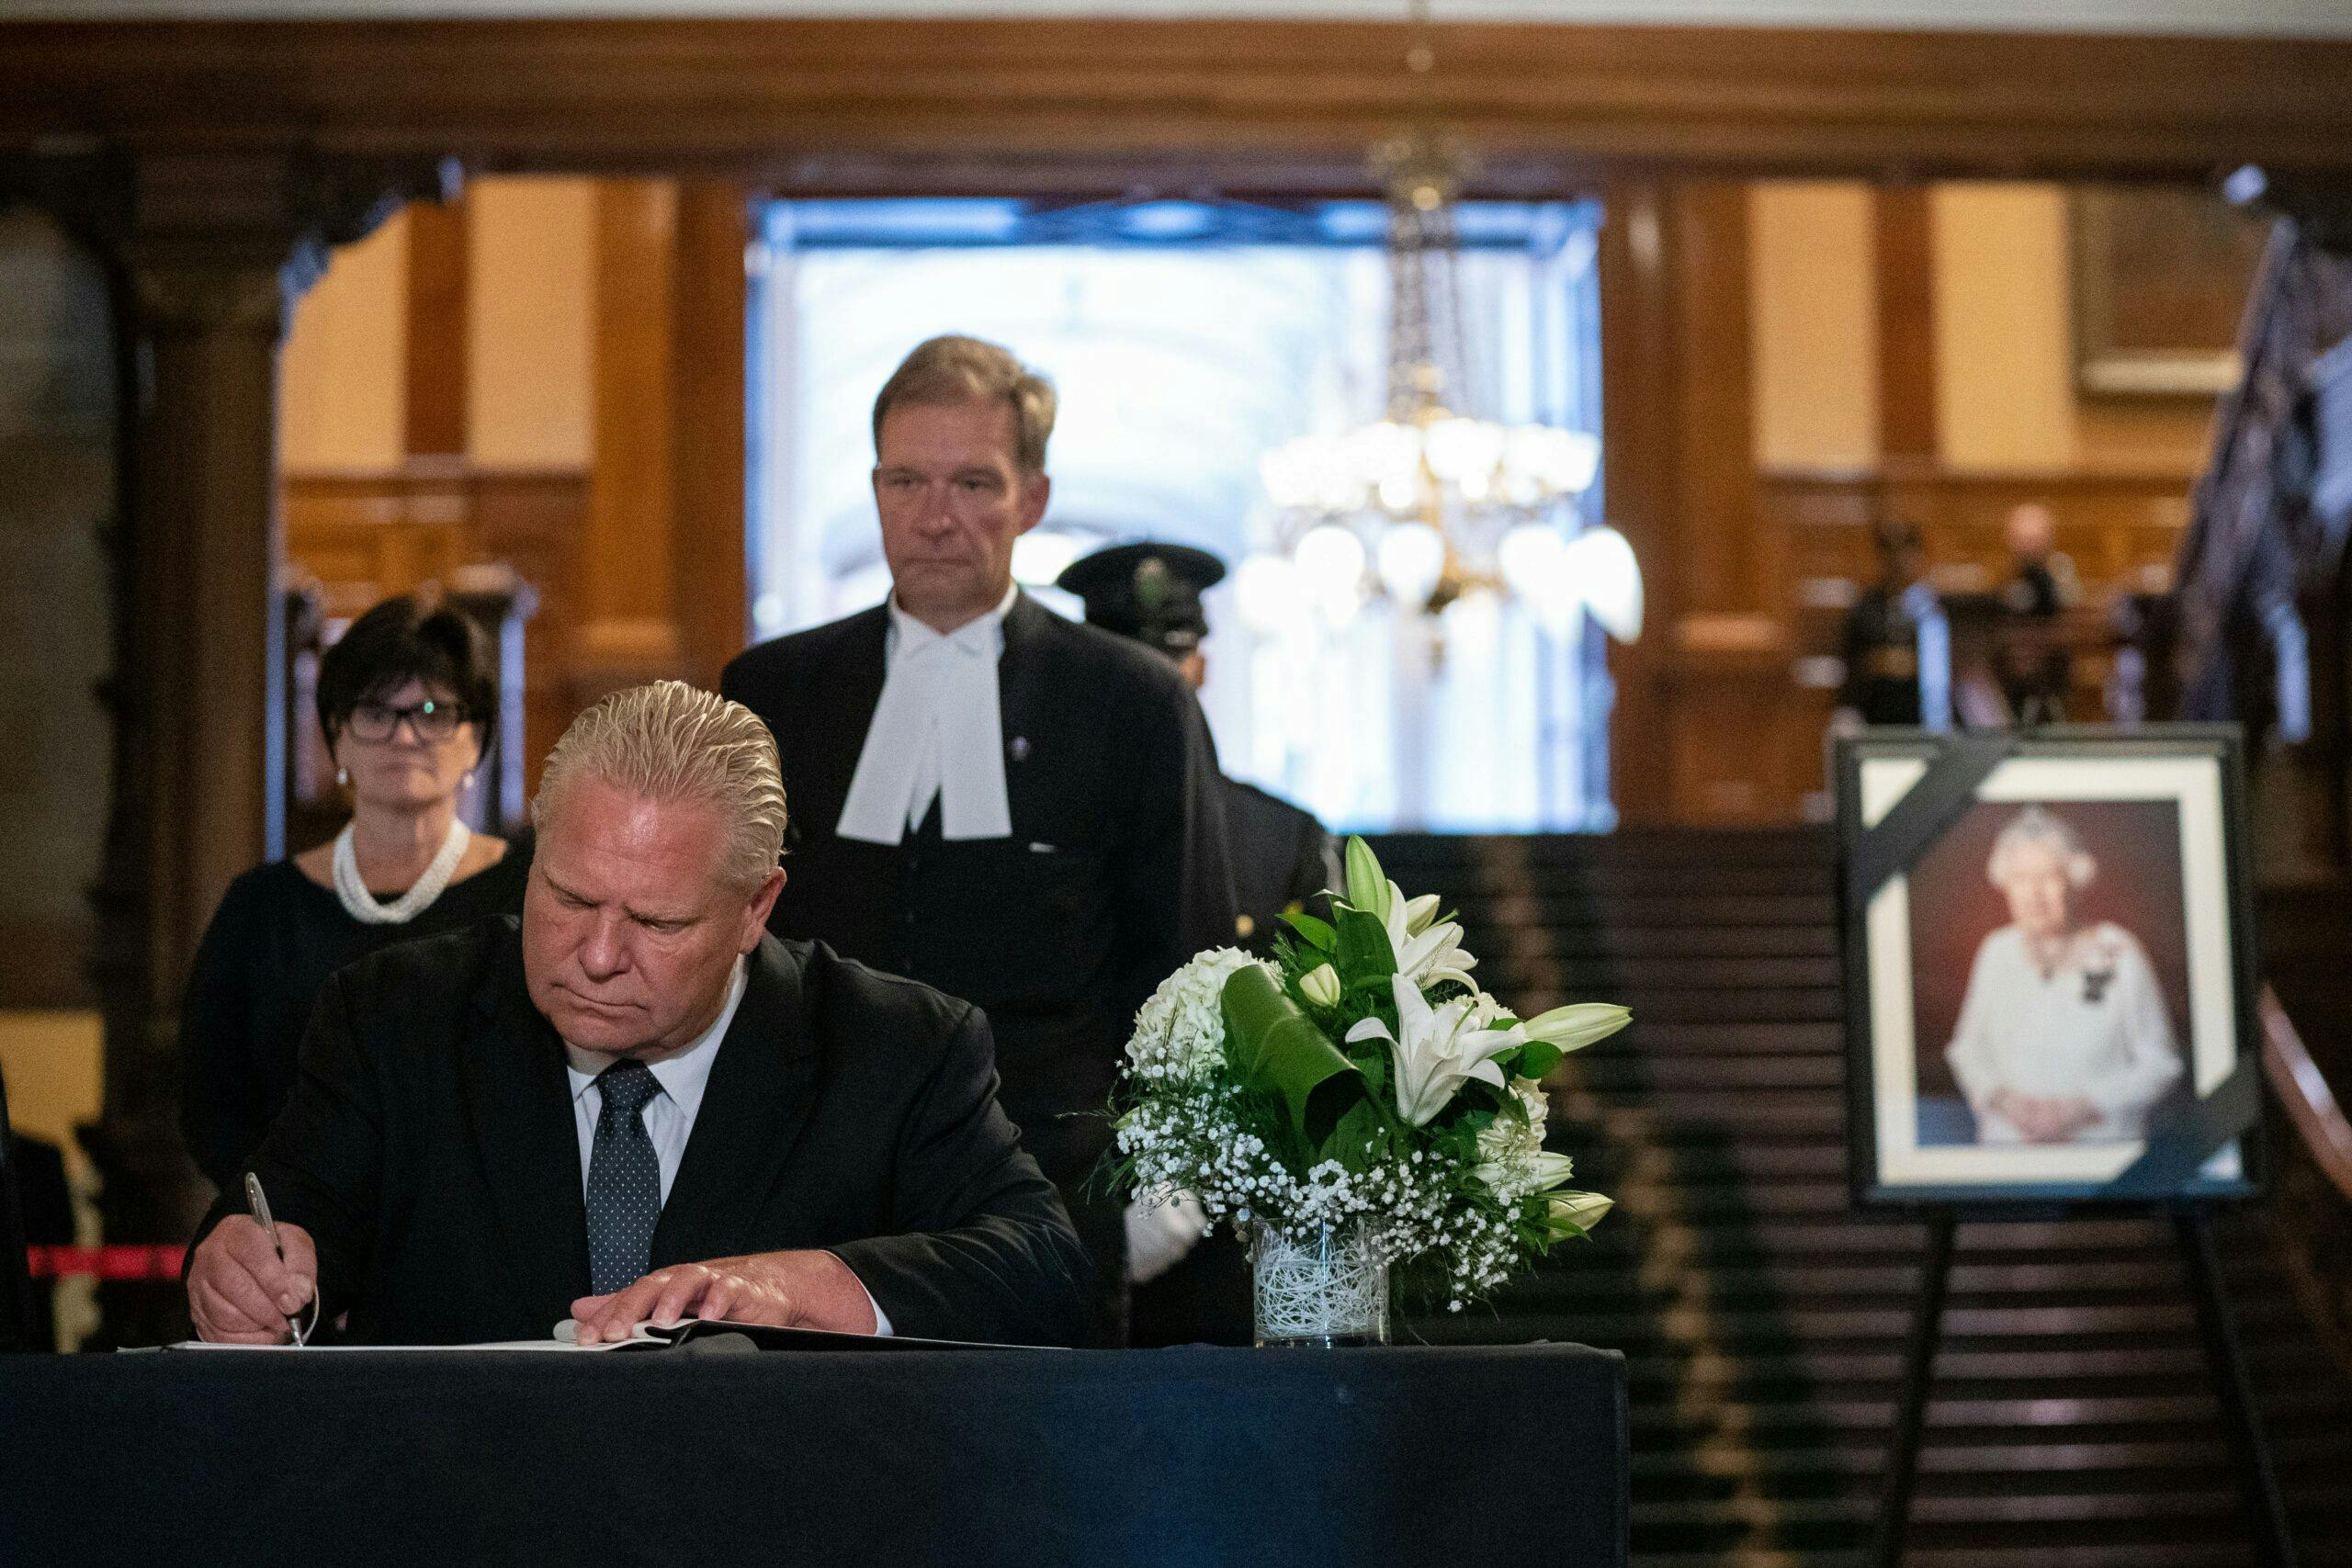 In tribute to queen, Ontario’s Ford says he will miss her ‘dearly’